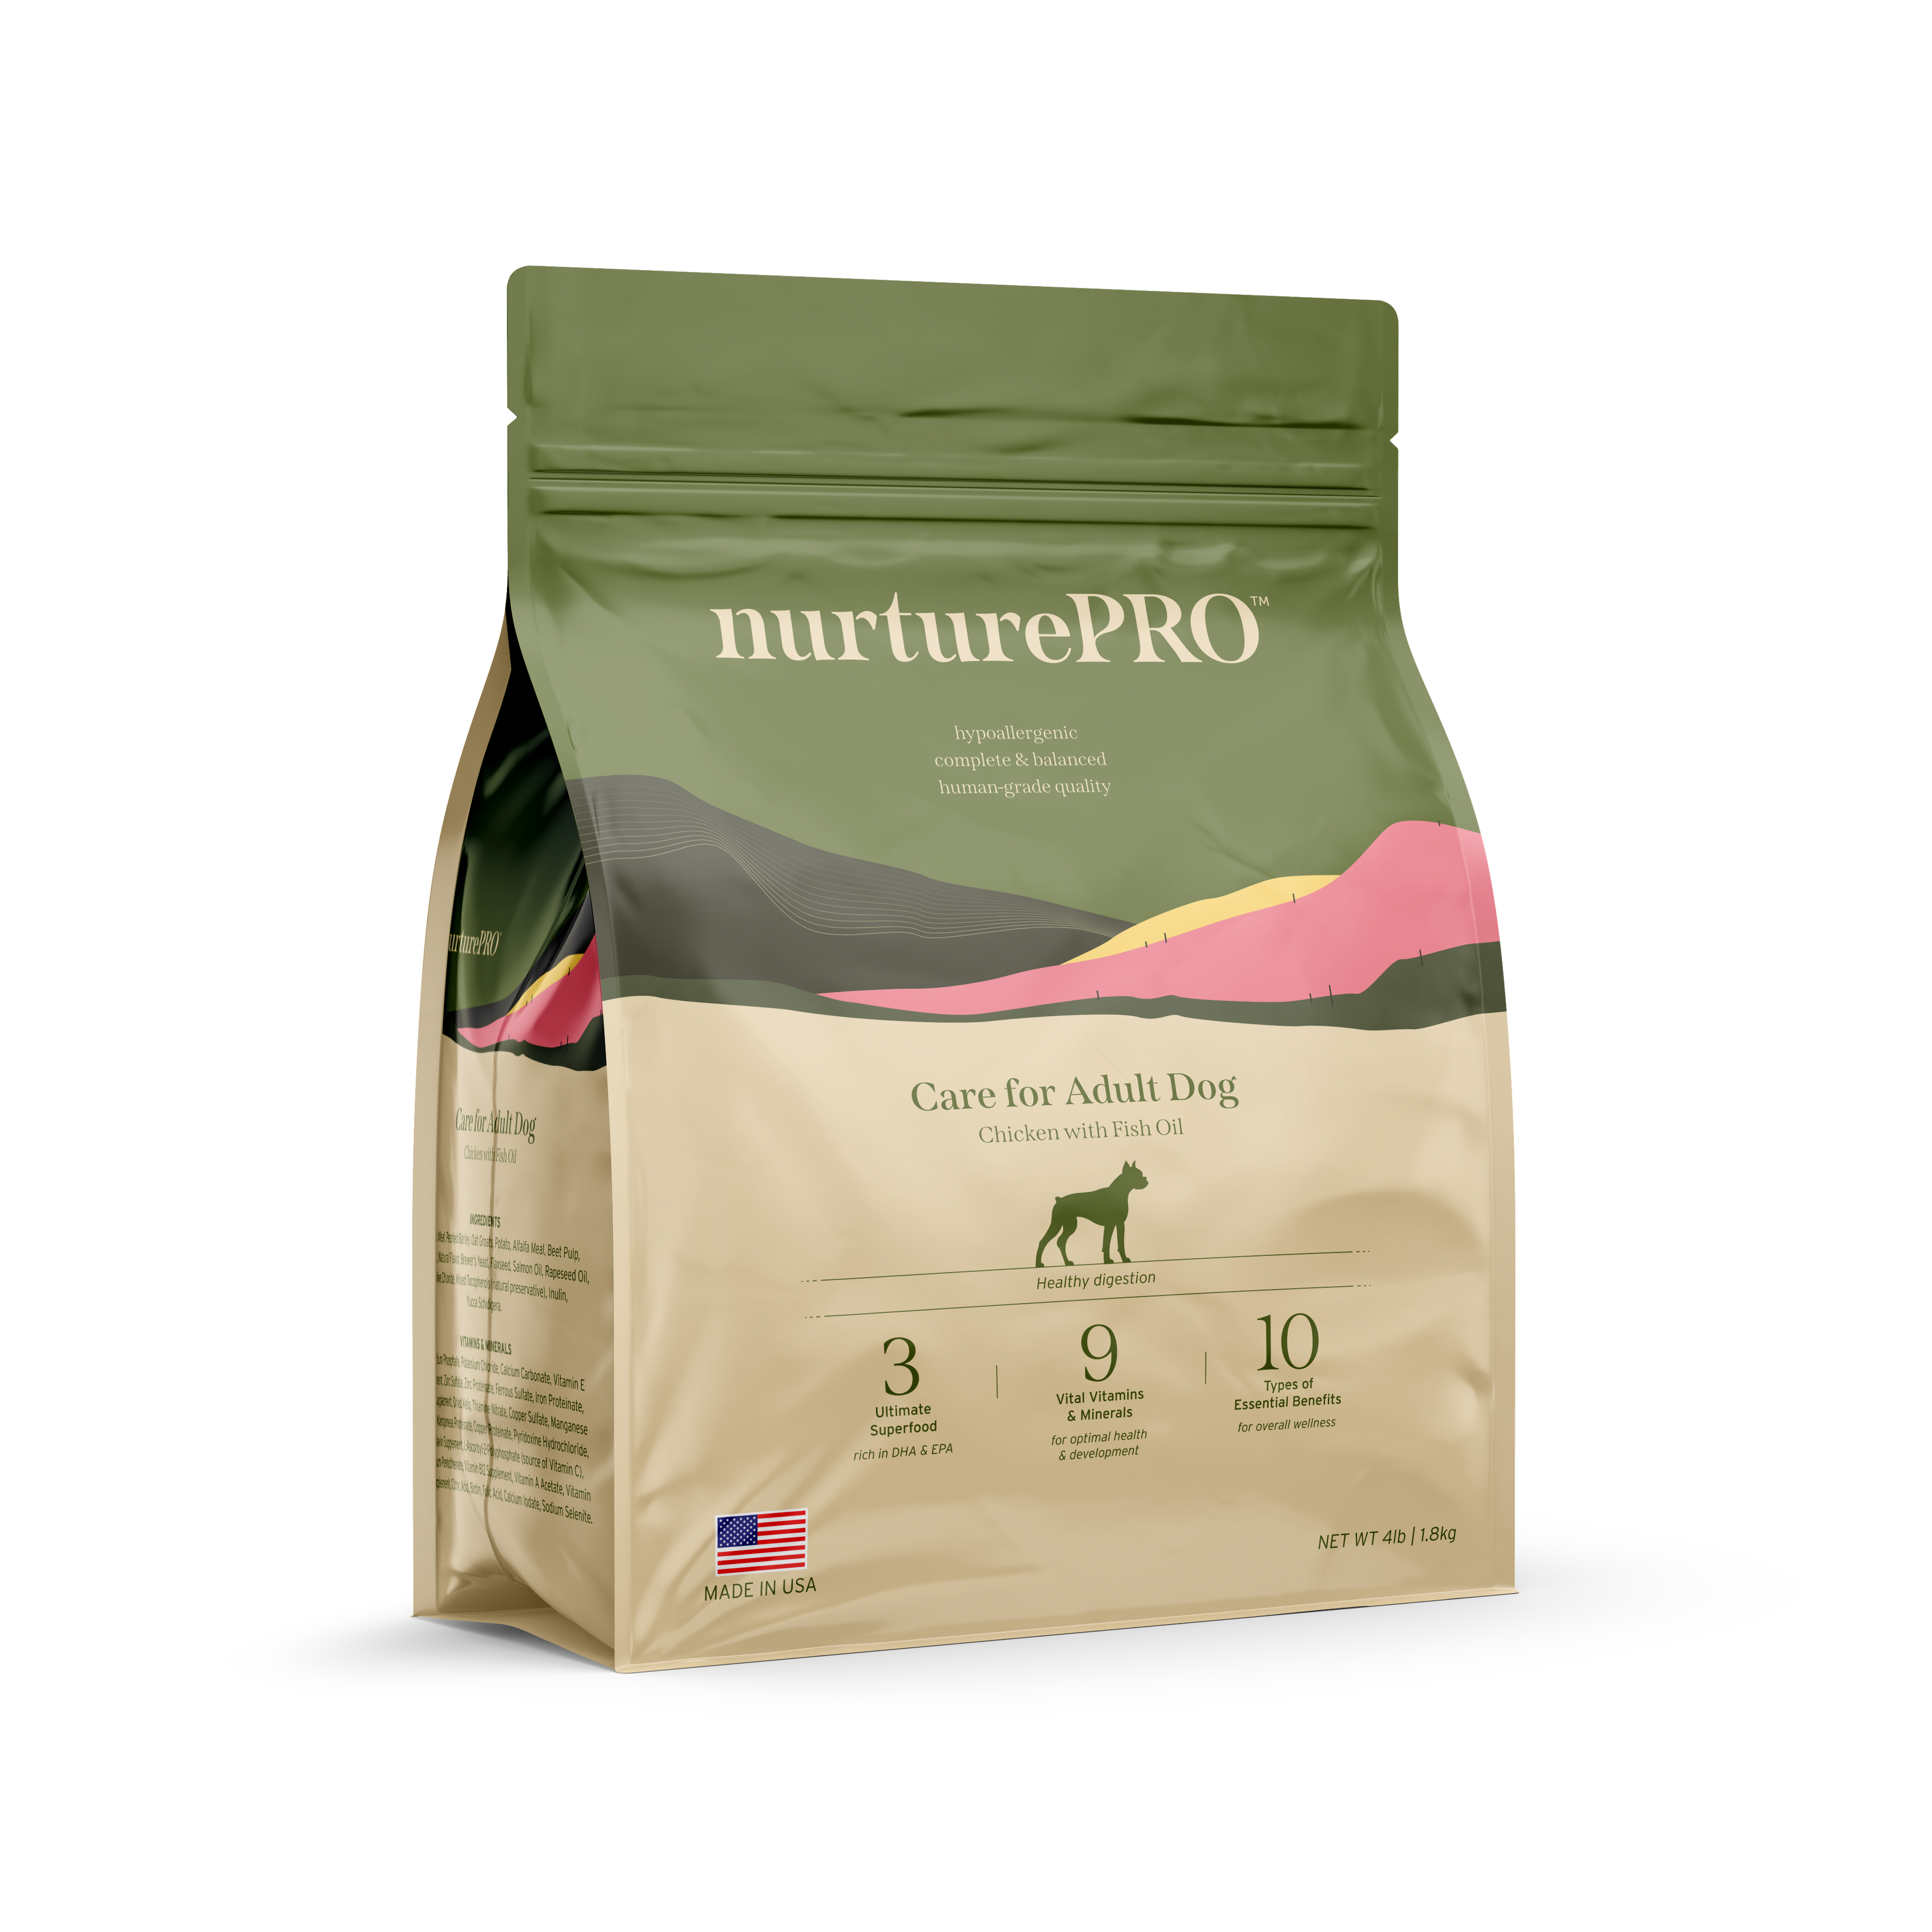 Nurture Pro Care for Adult Dogs Chicken with Fish Oil